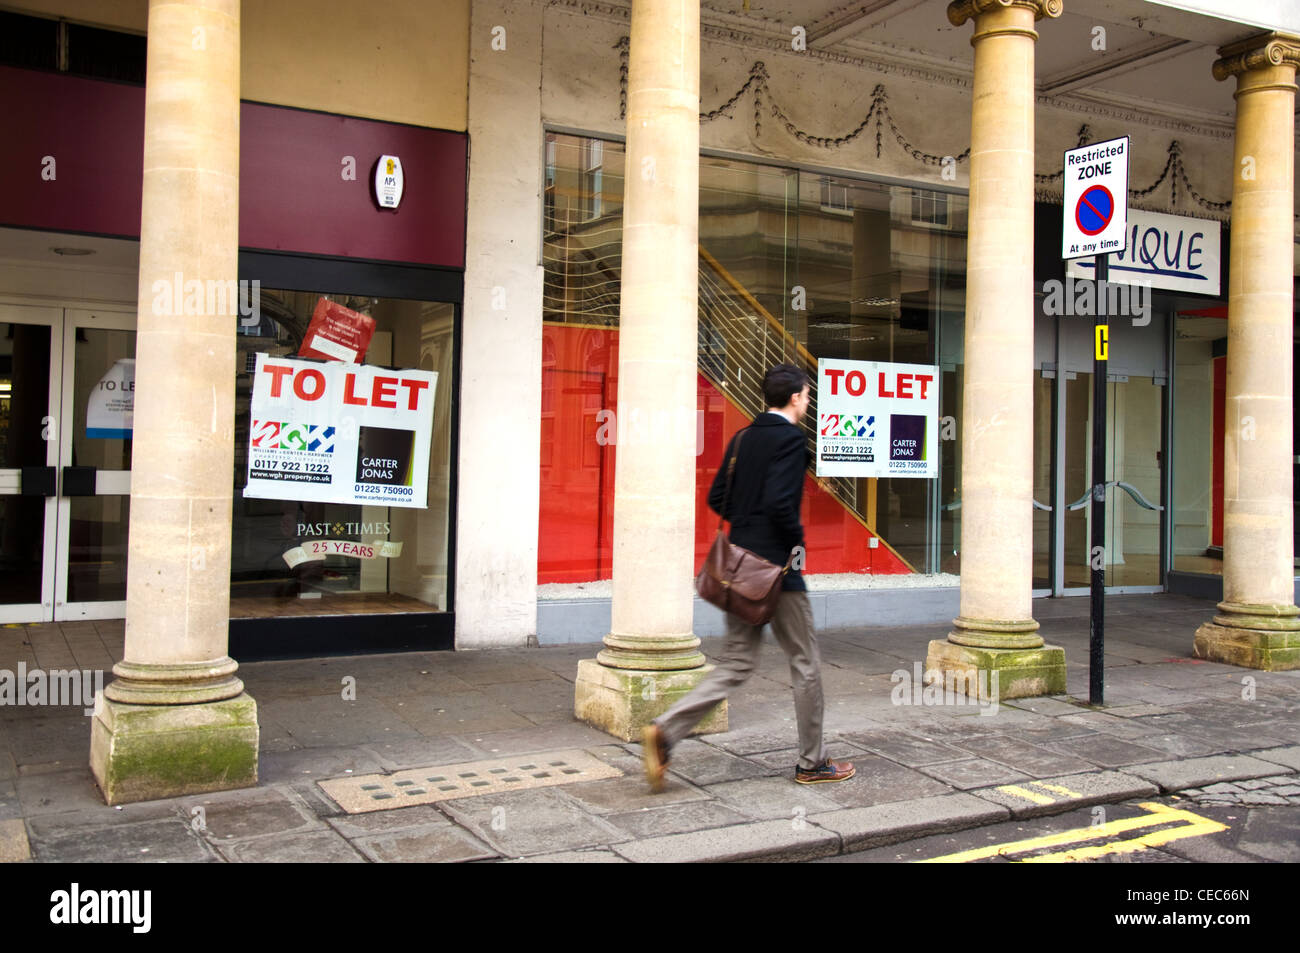 Shops to let in Stall Street in city centre Stock Photo